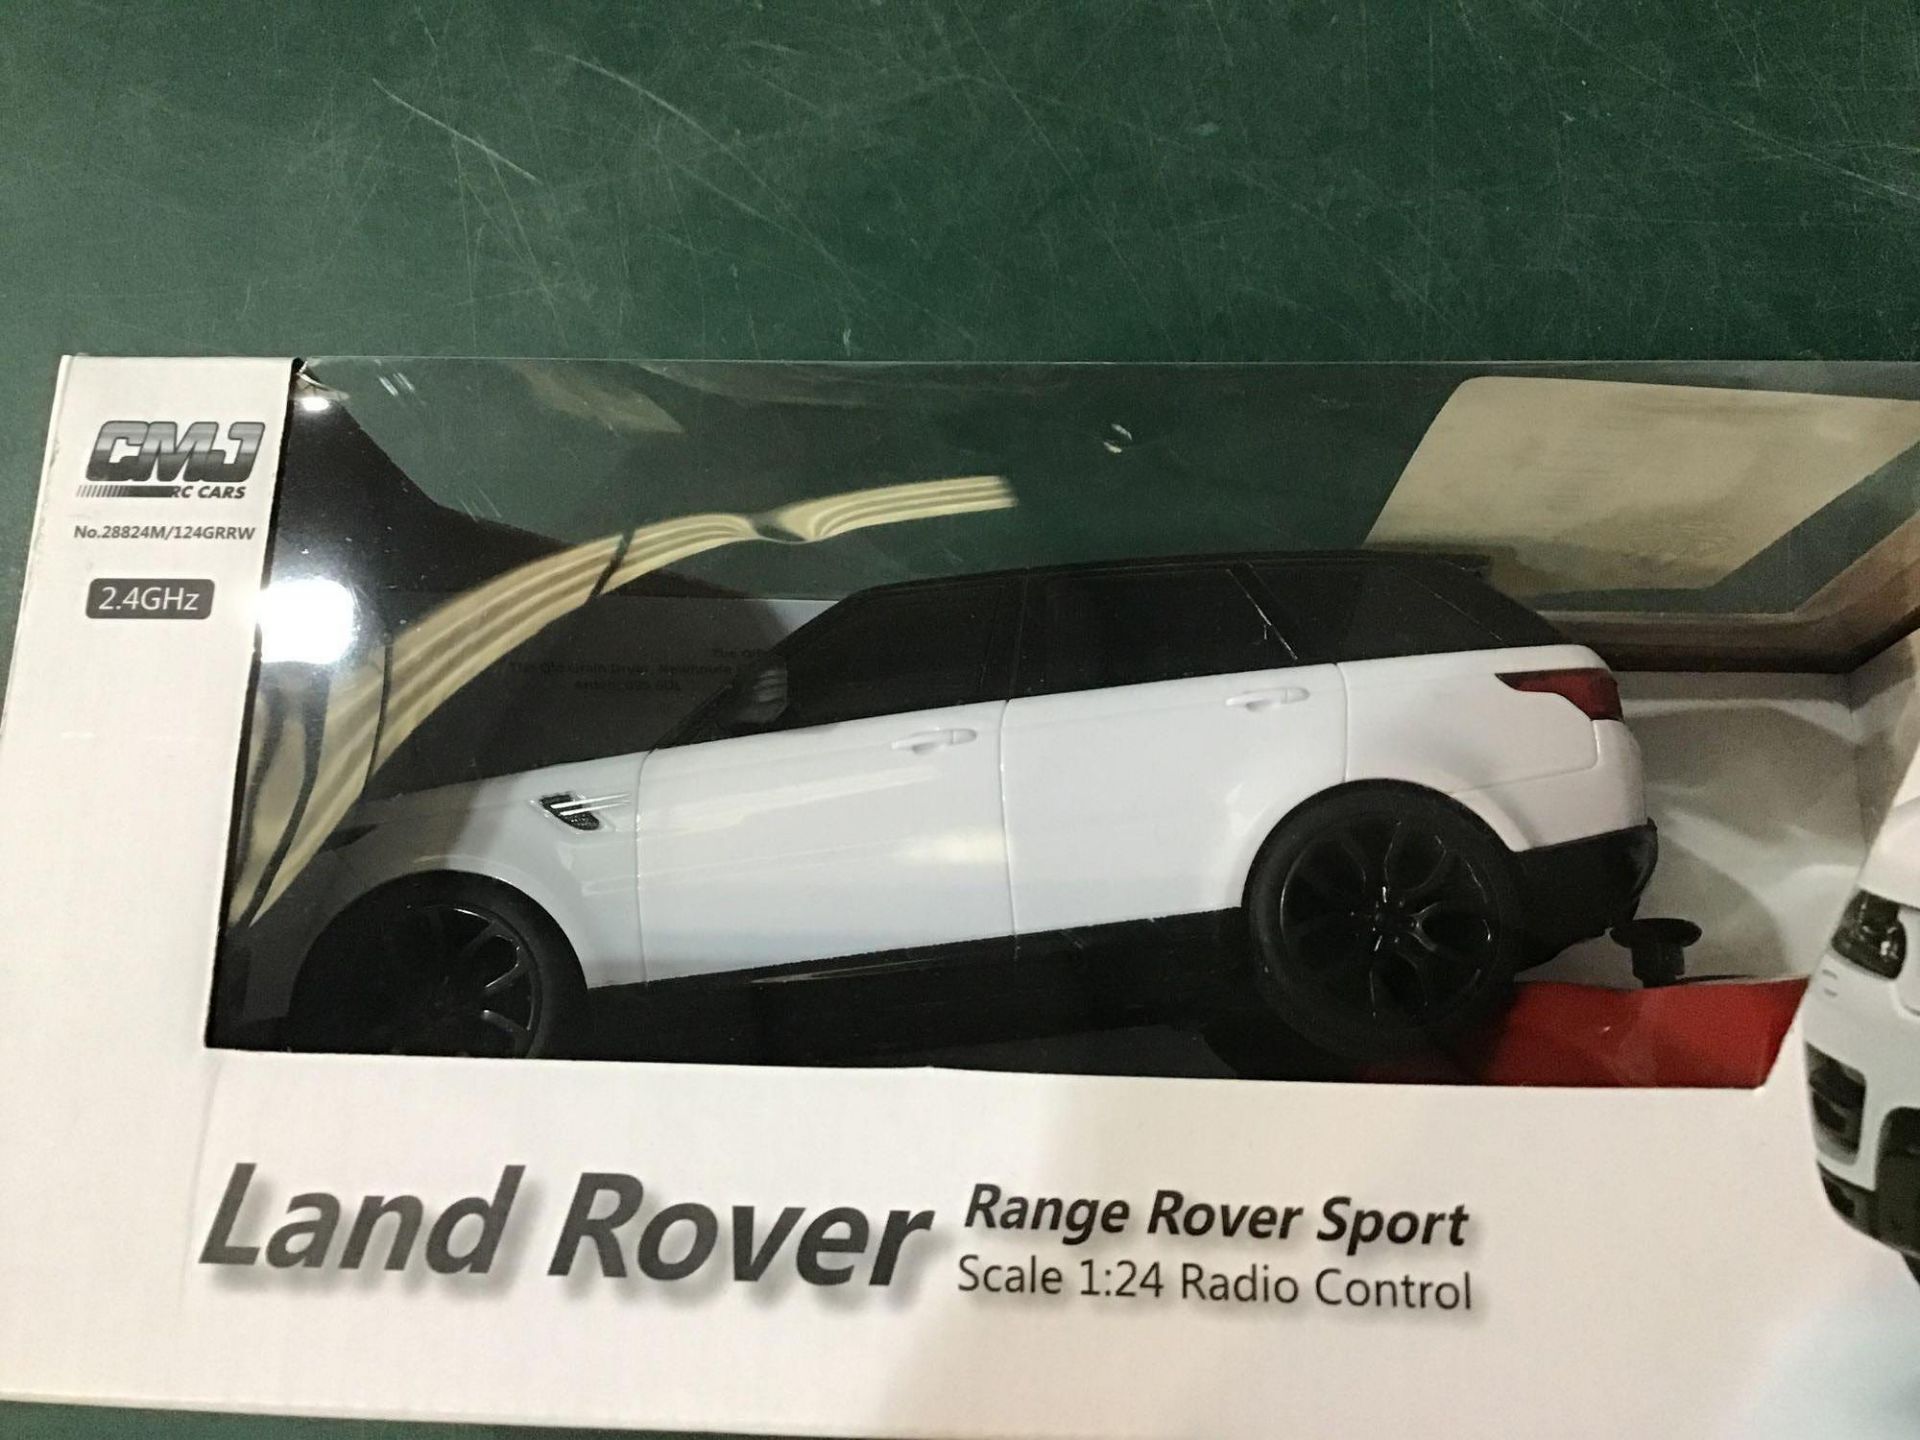 Radio Controlled Range Rover 1:24 Scale - White 2.4GHZ - £11.00 RRP - Image 2 of 4